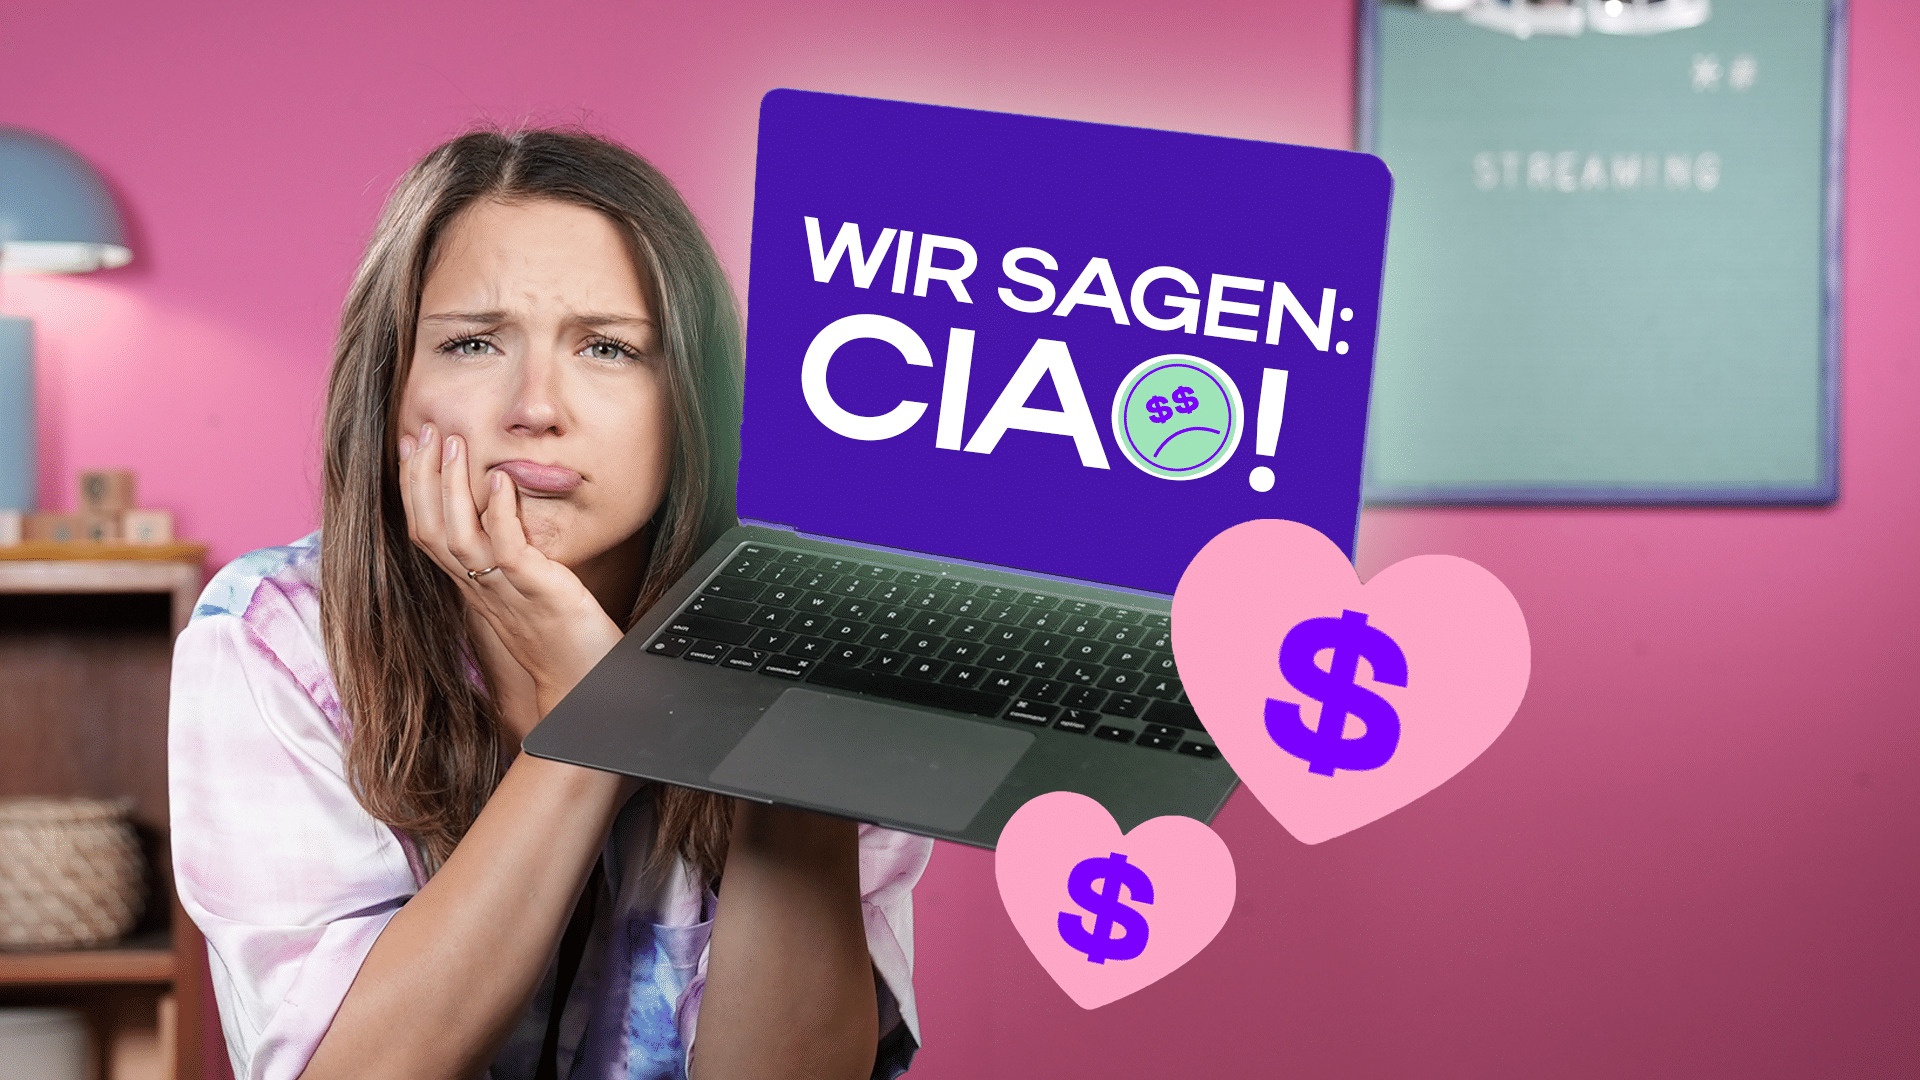 Unser letztes Video!